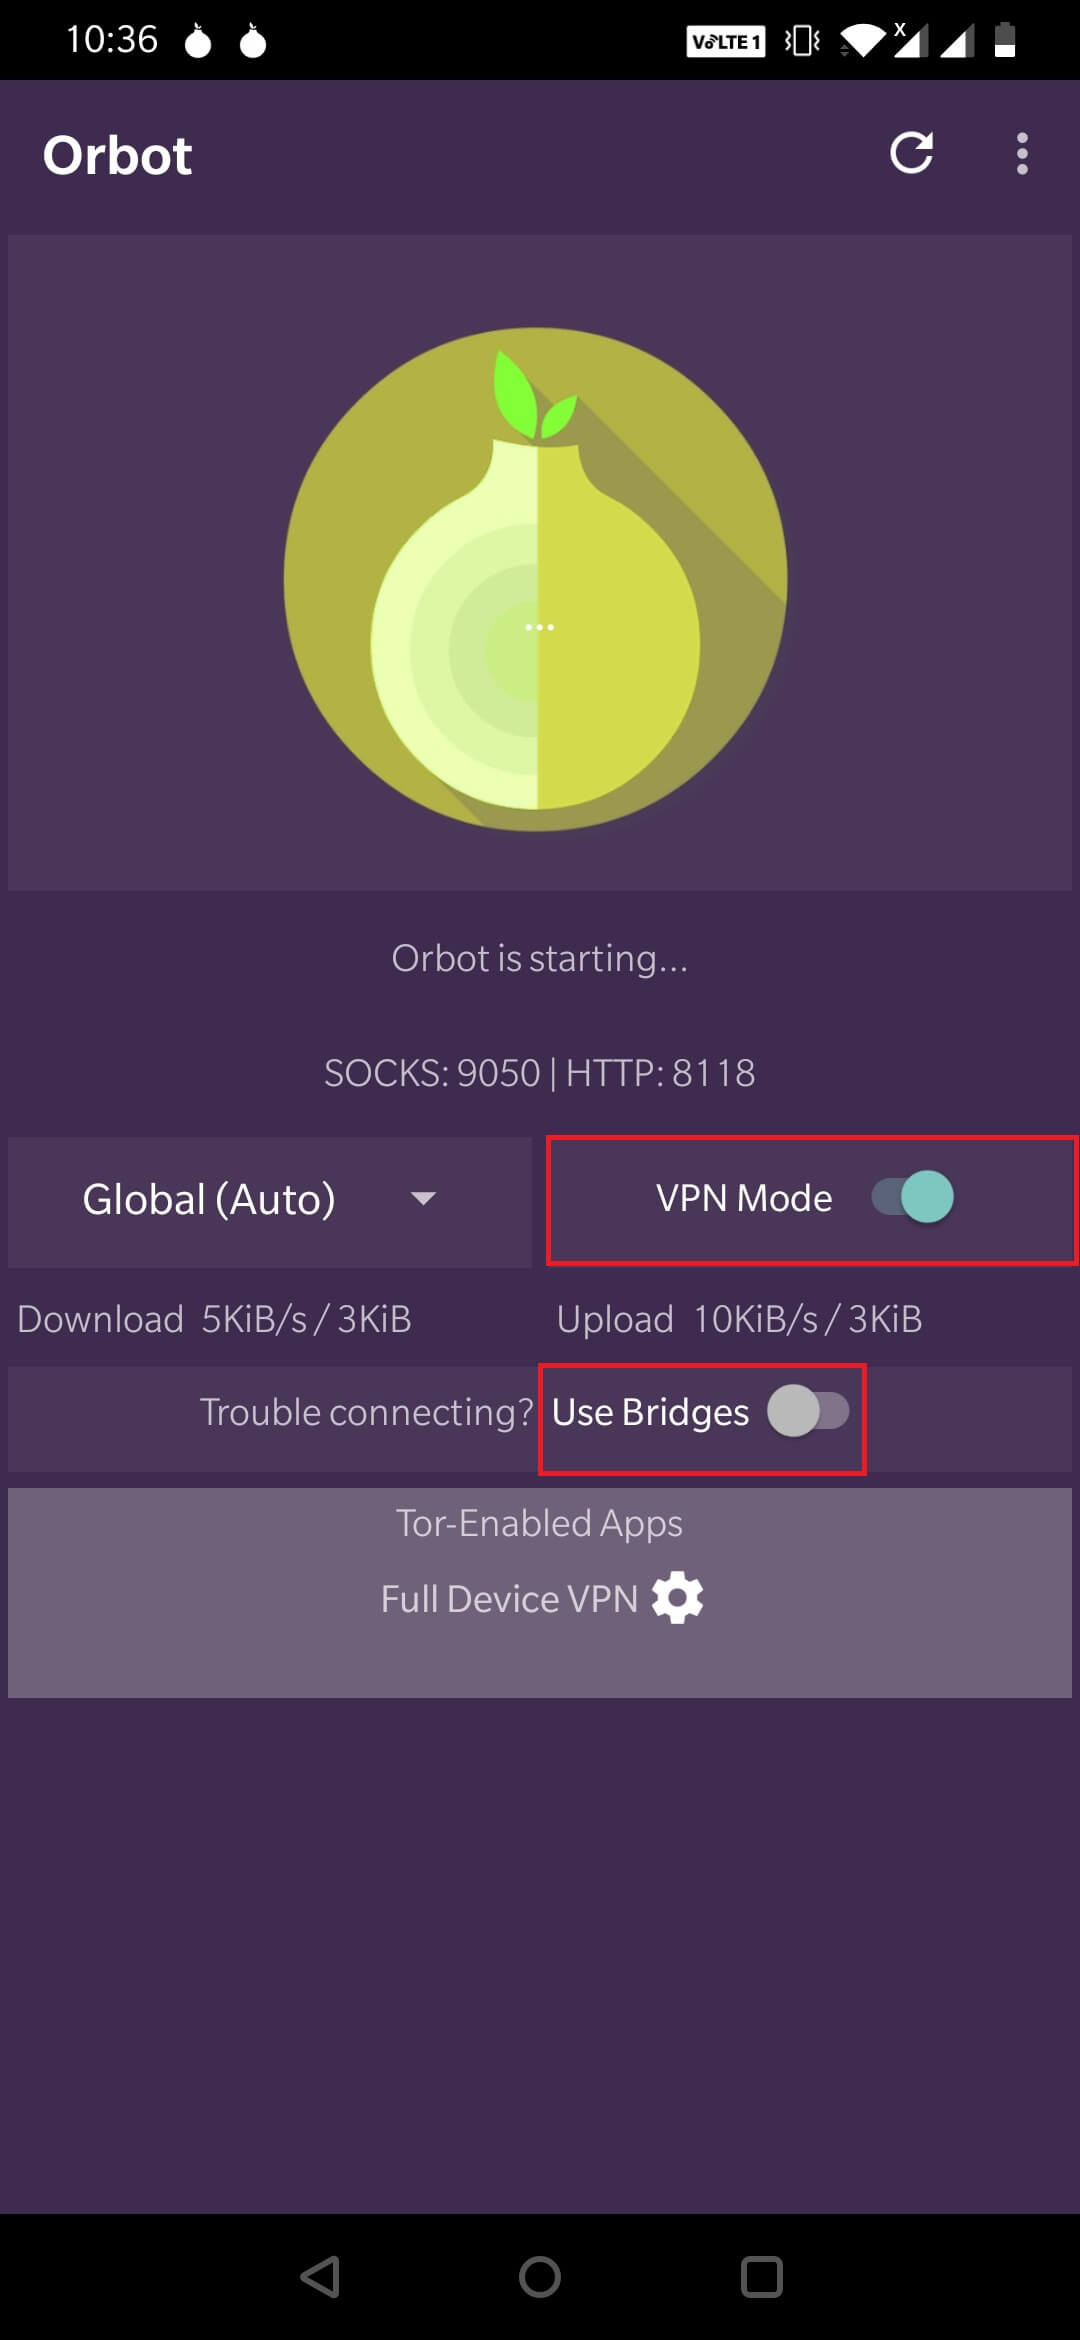 Open the Orbot application. Press on ‘Start’ and enable VPN mode.